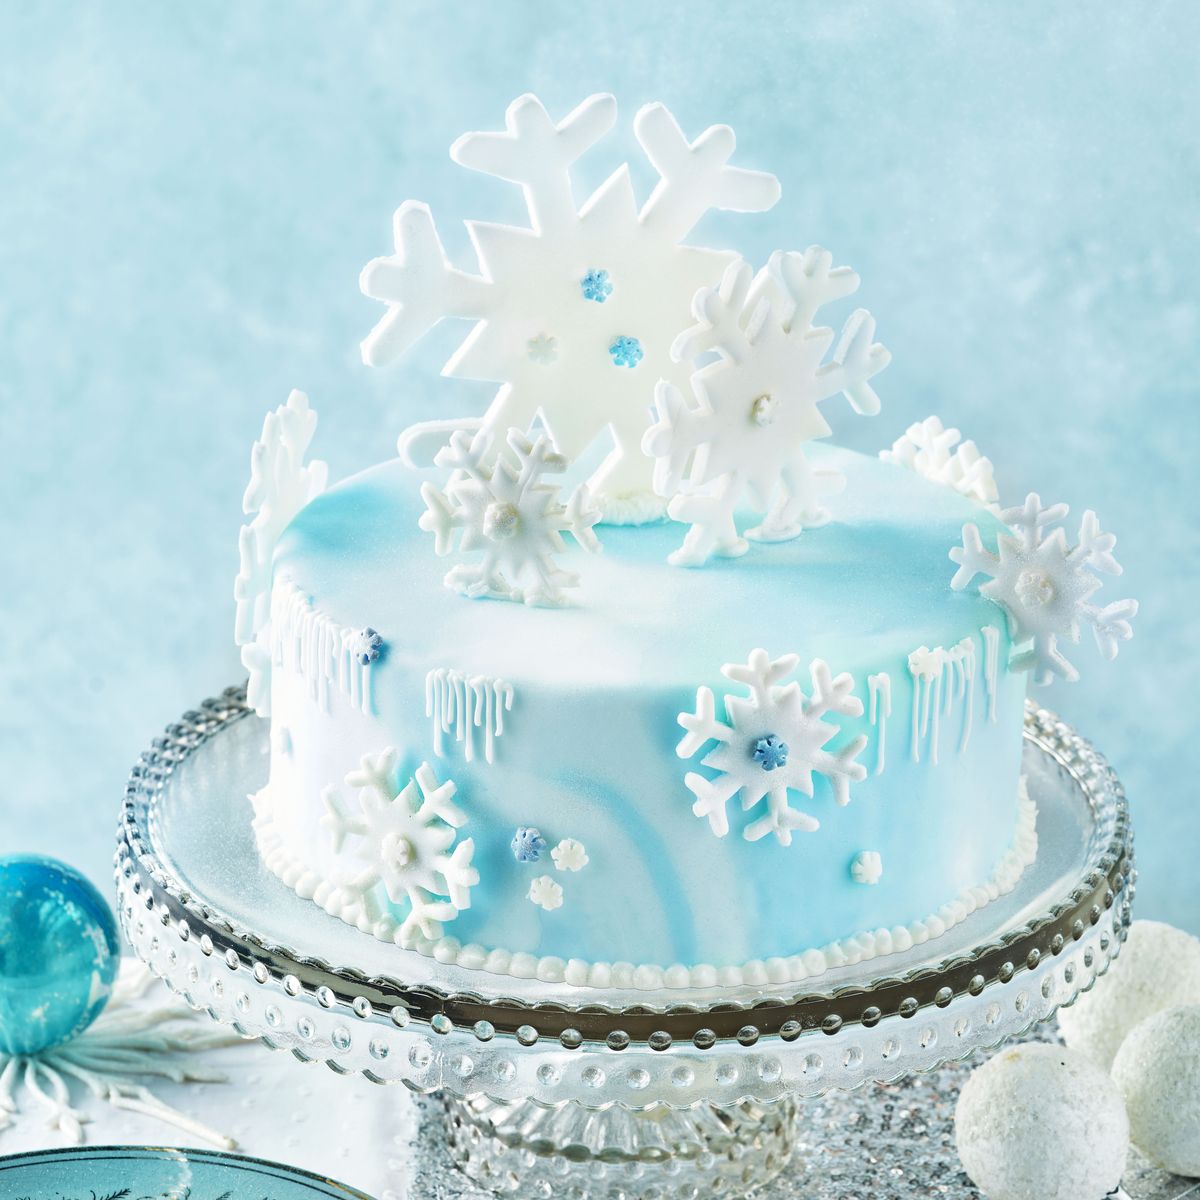 Christmas Cake with 'Frosticle' Icing